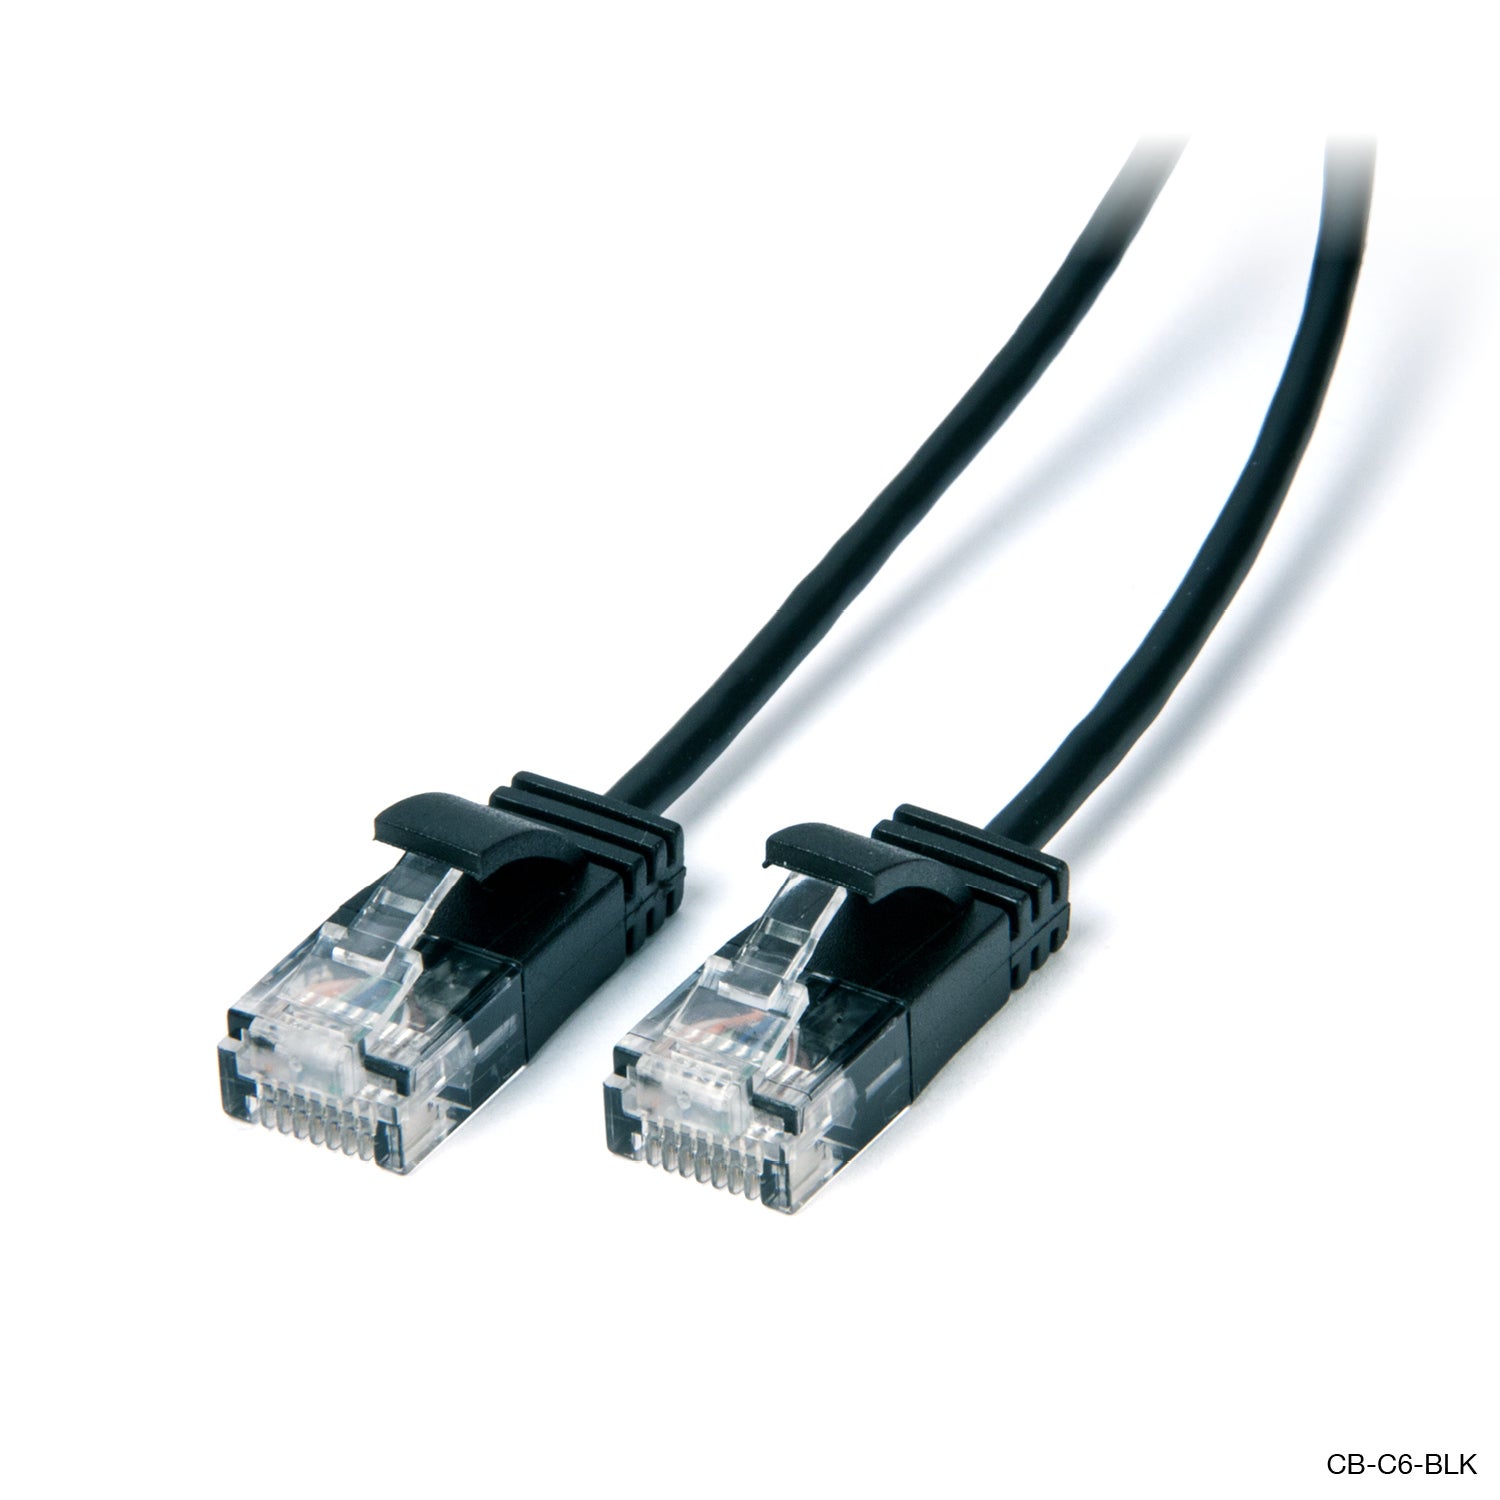 2m Ultra Slim Cat6 Network Cable Black